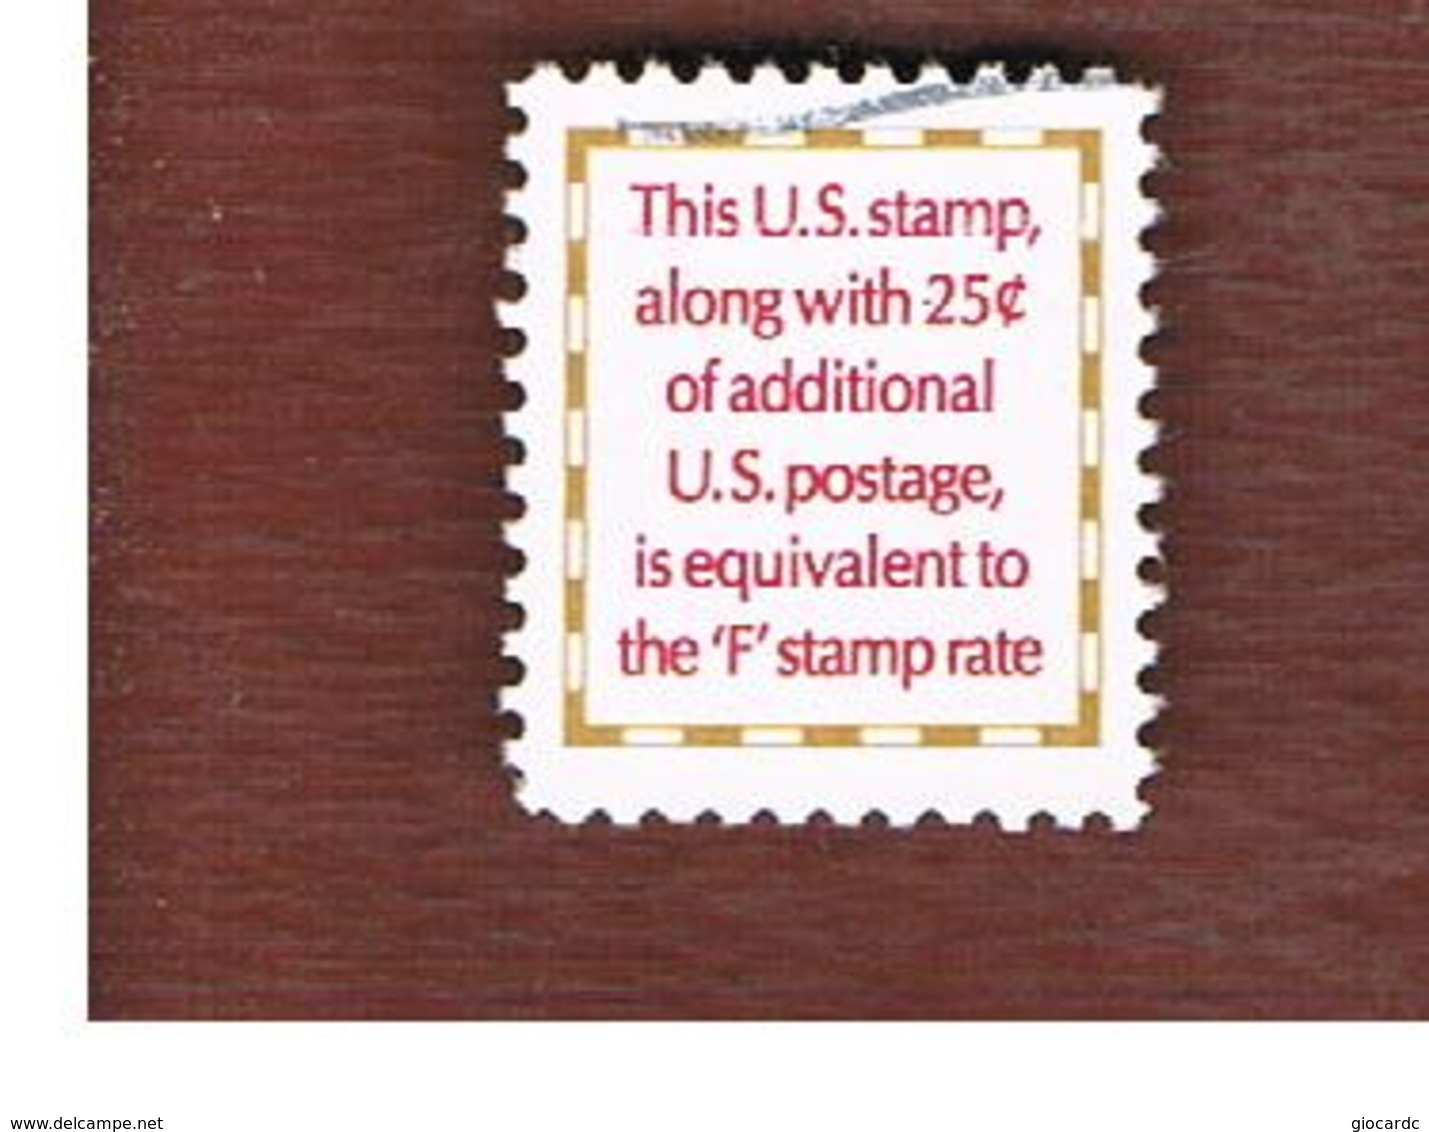 STATI UNITI (U.S.A.) - SG 2556  - 1991 RATE MAKING-UP  STAMPS, NO VALUE - USED - Gebraucht